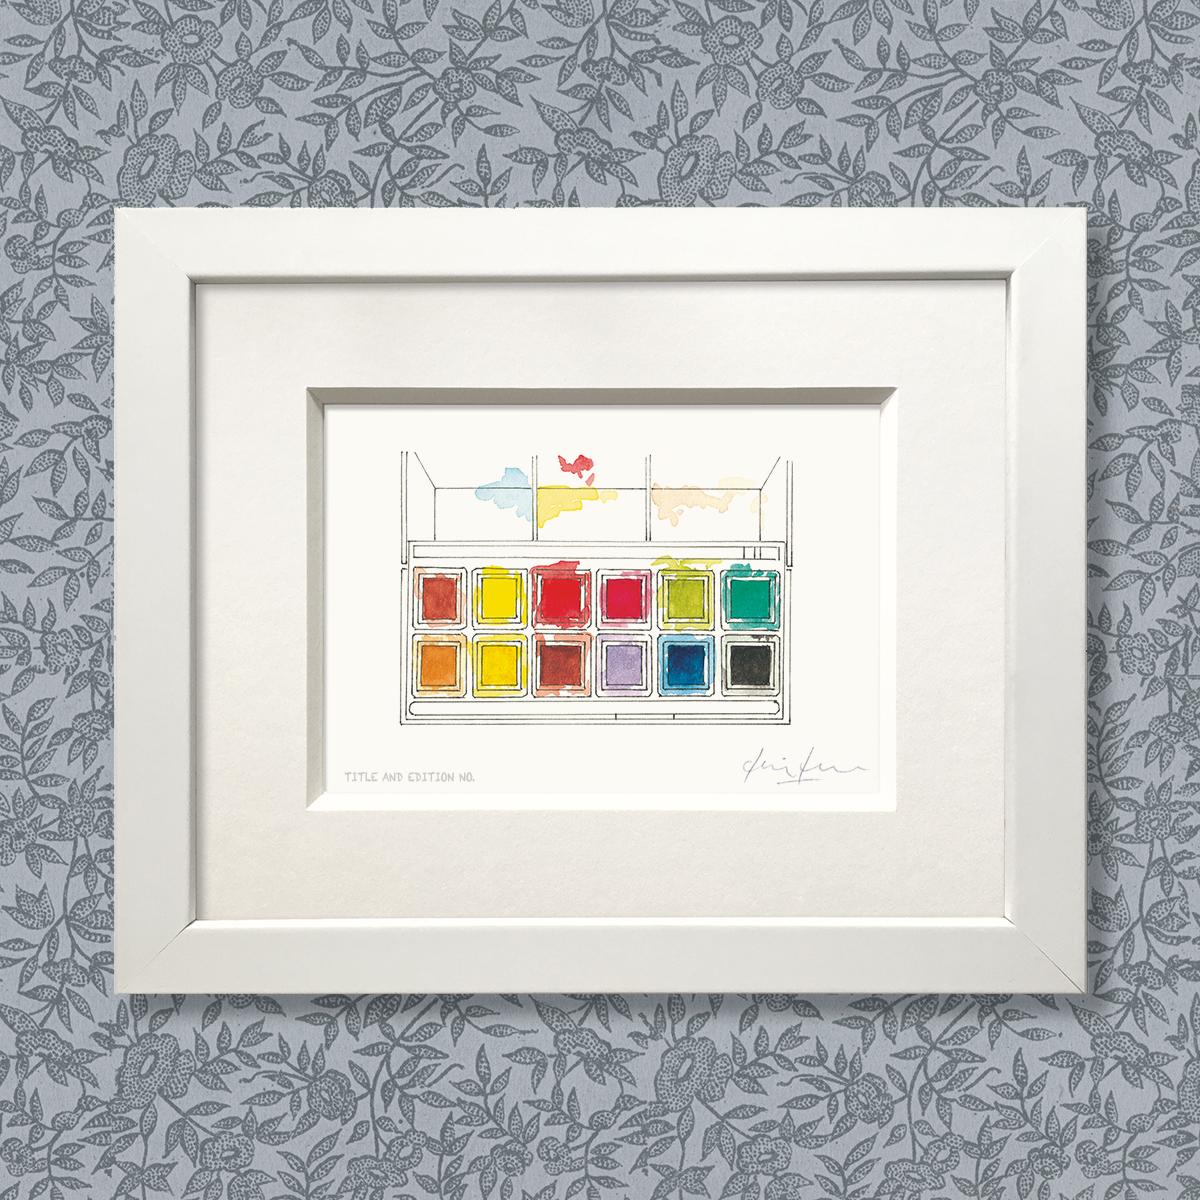 Limited edition print from pen, ink and watercolour sketch of a paint box in a white frame